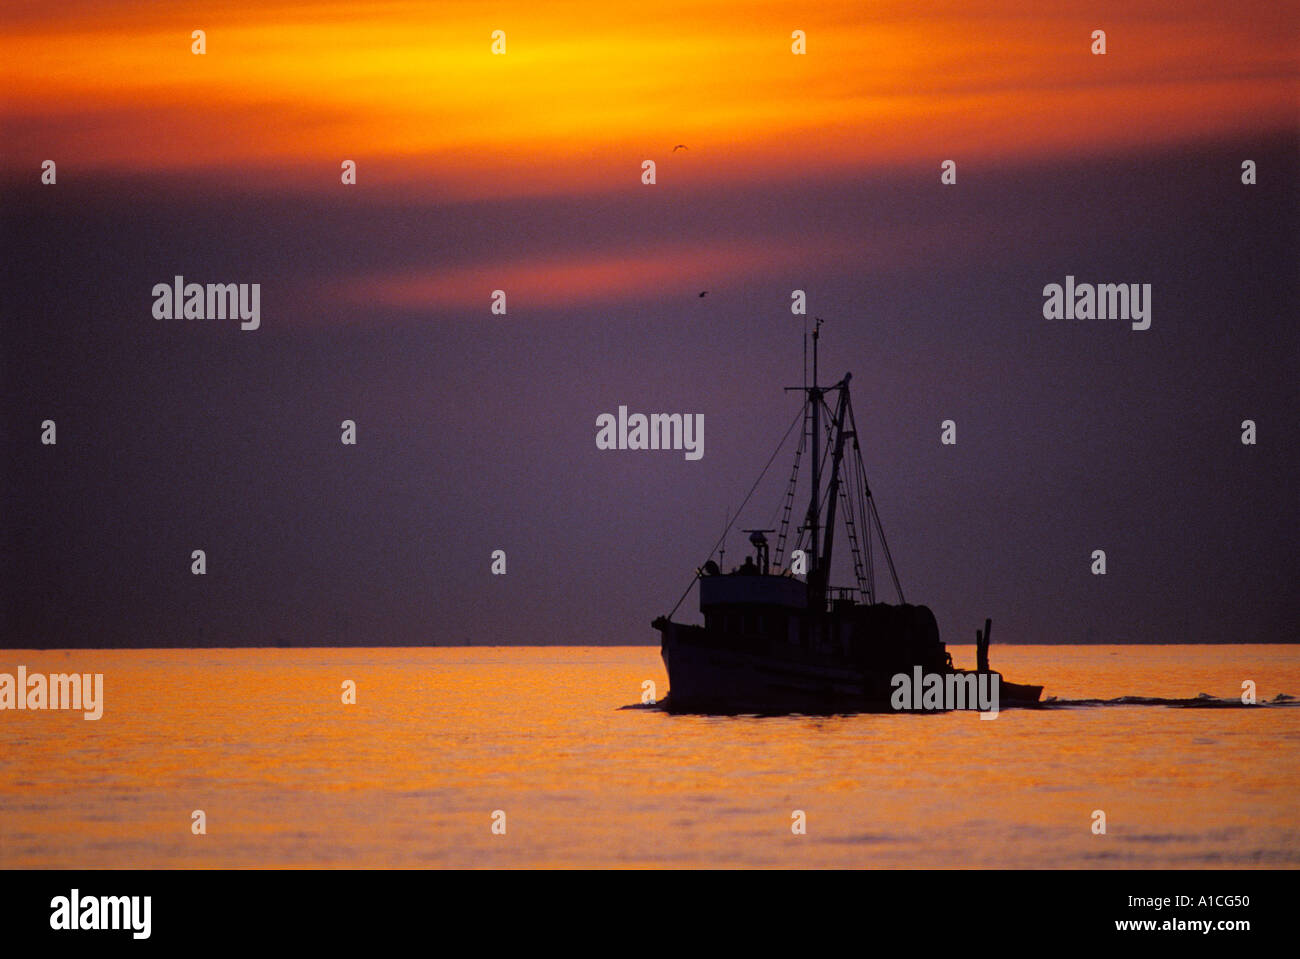 Seagulls accompany a fishing boat as it returns to port at sunset Stock Photo